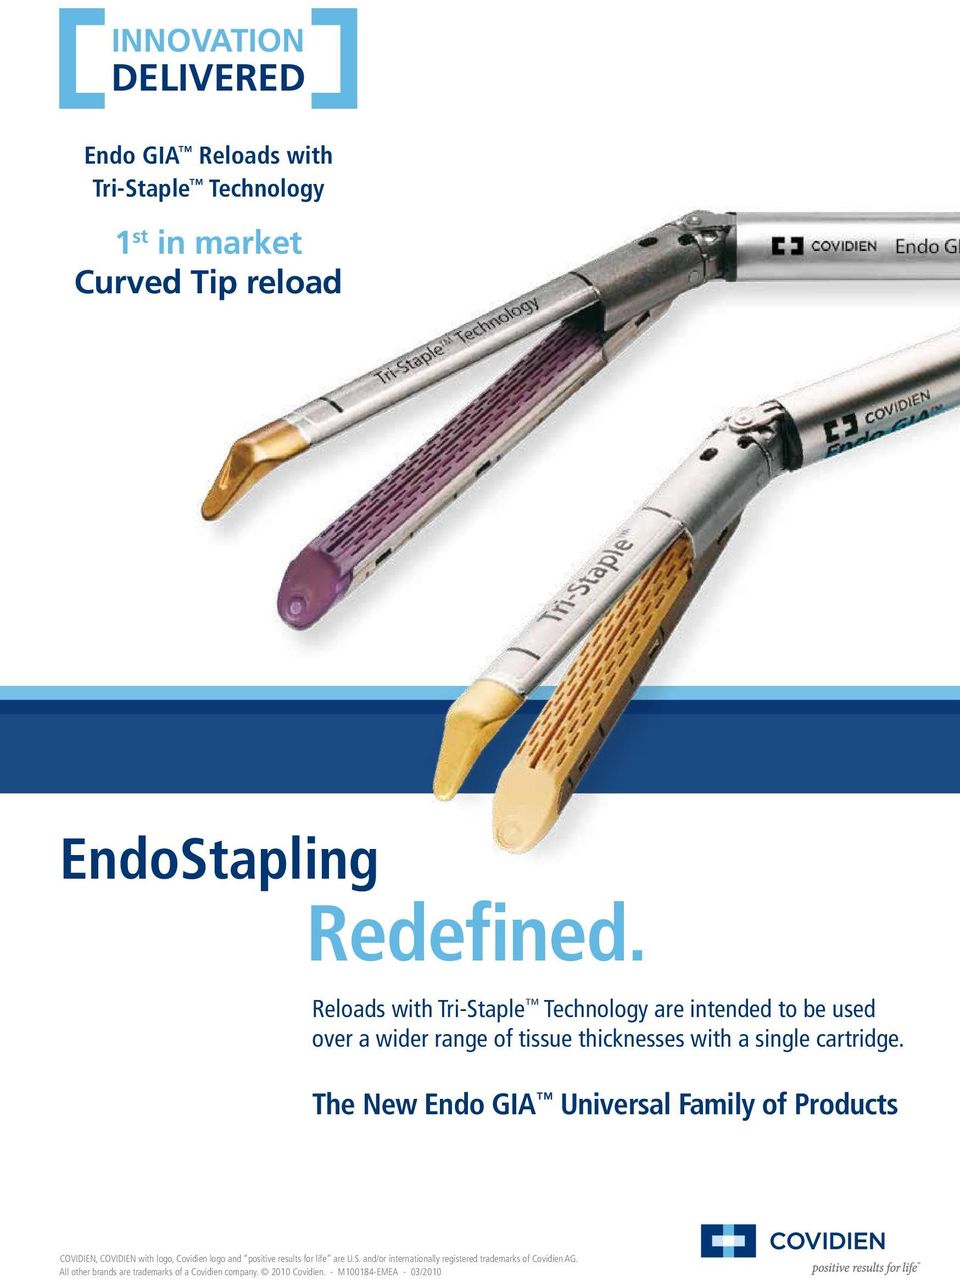 The New Endo GIA Universal Family of Products COVIDIEN, COVIDIEN with logo, Covidien logo and positive results for life are U.S.